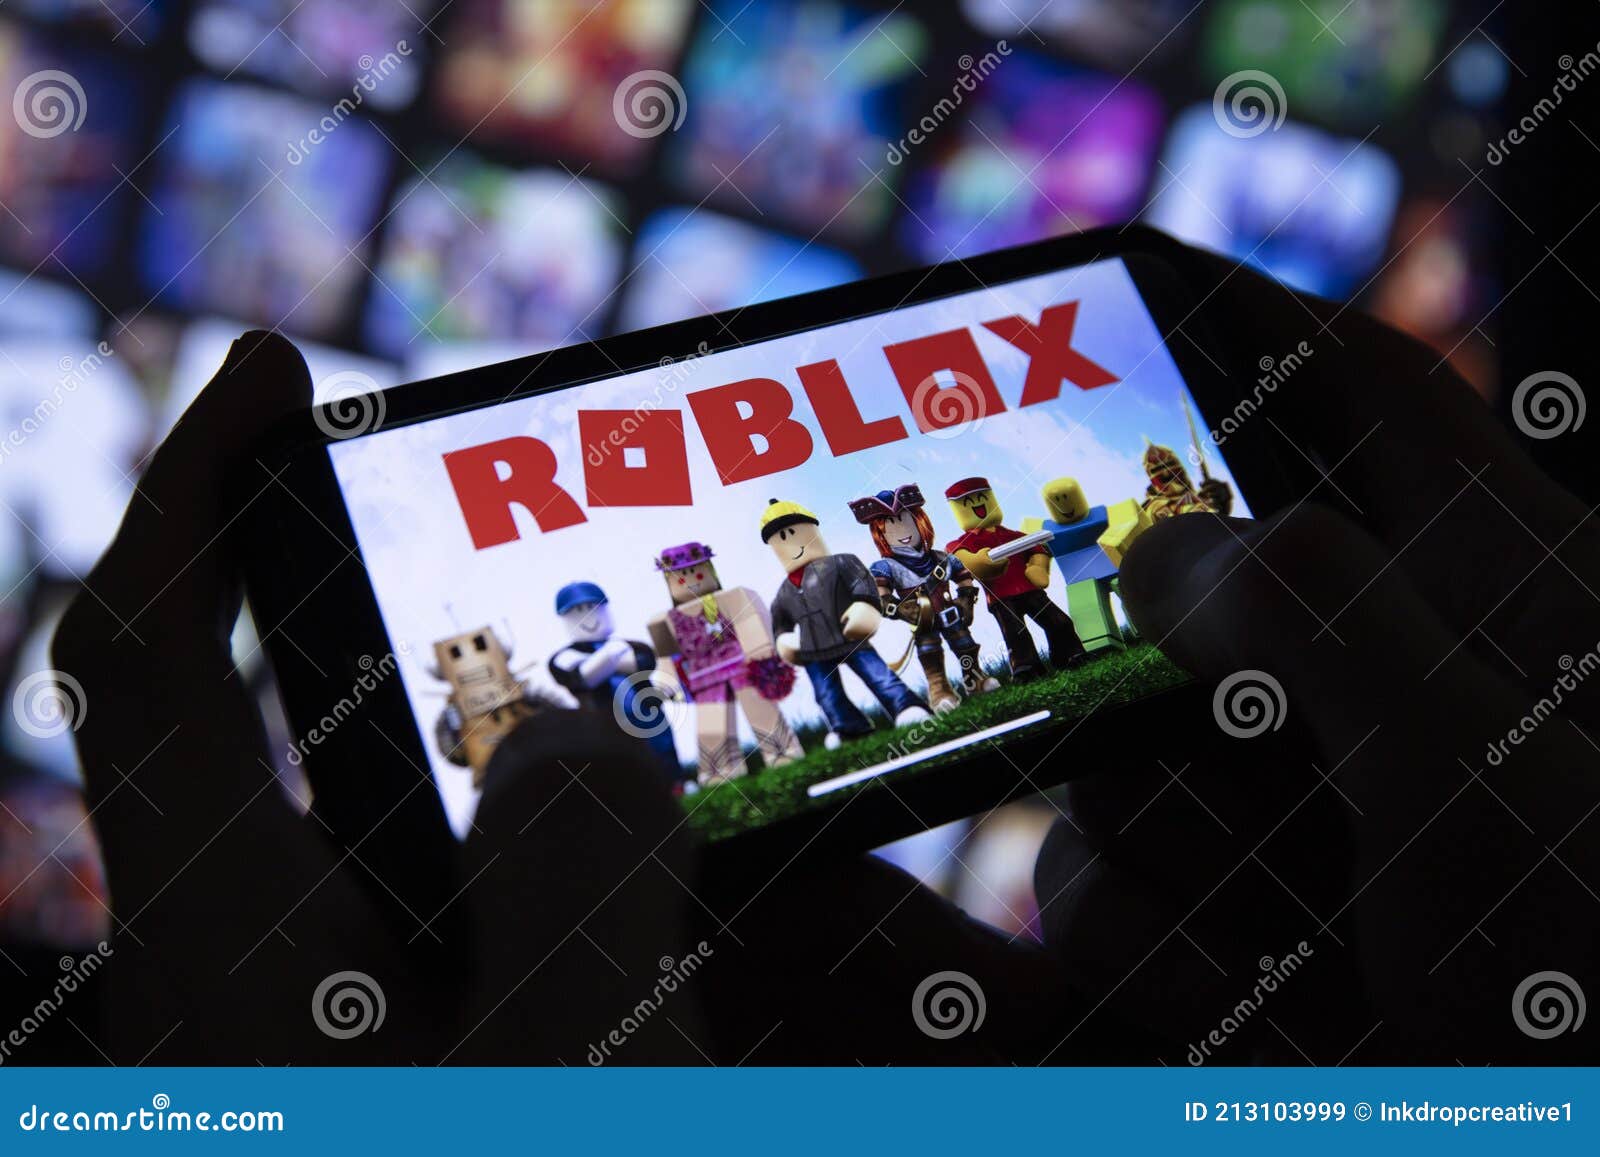 Roblox Photos Free Royalty Free Stock Photos From Dreamstime - london roblox id